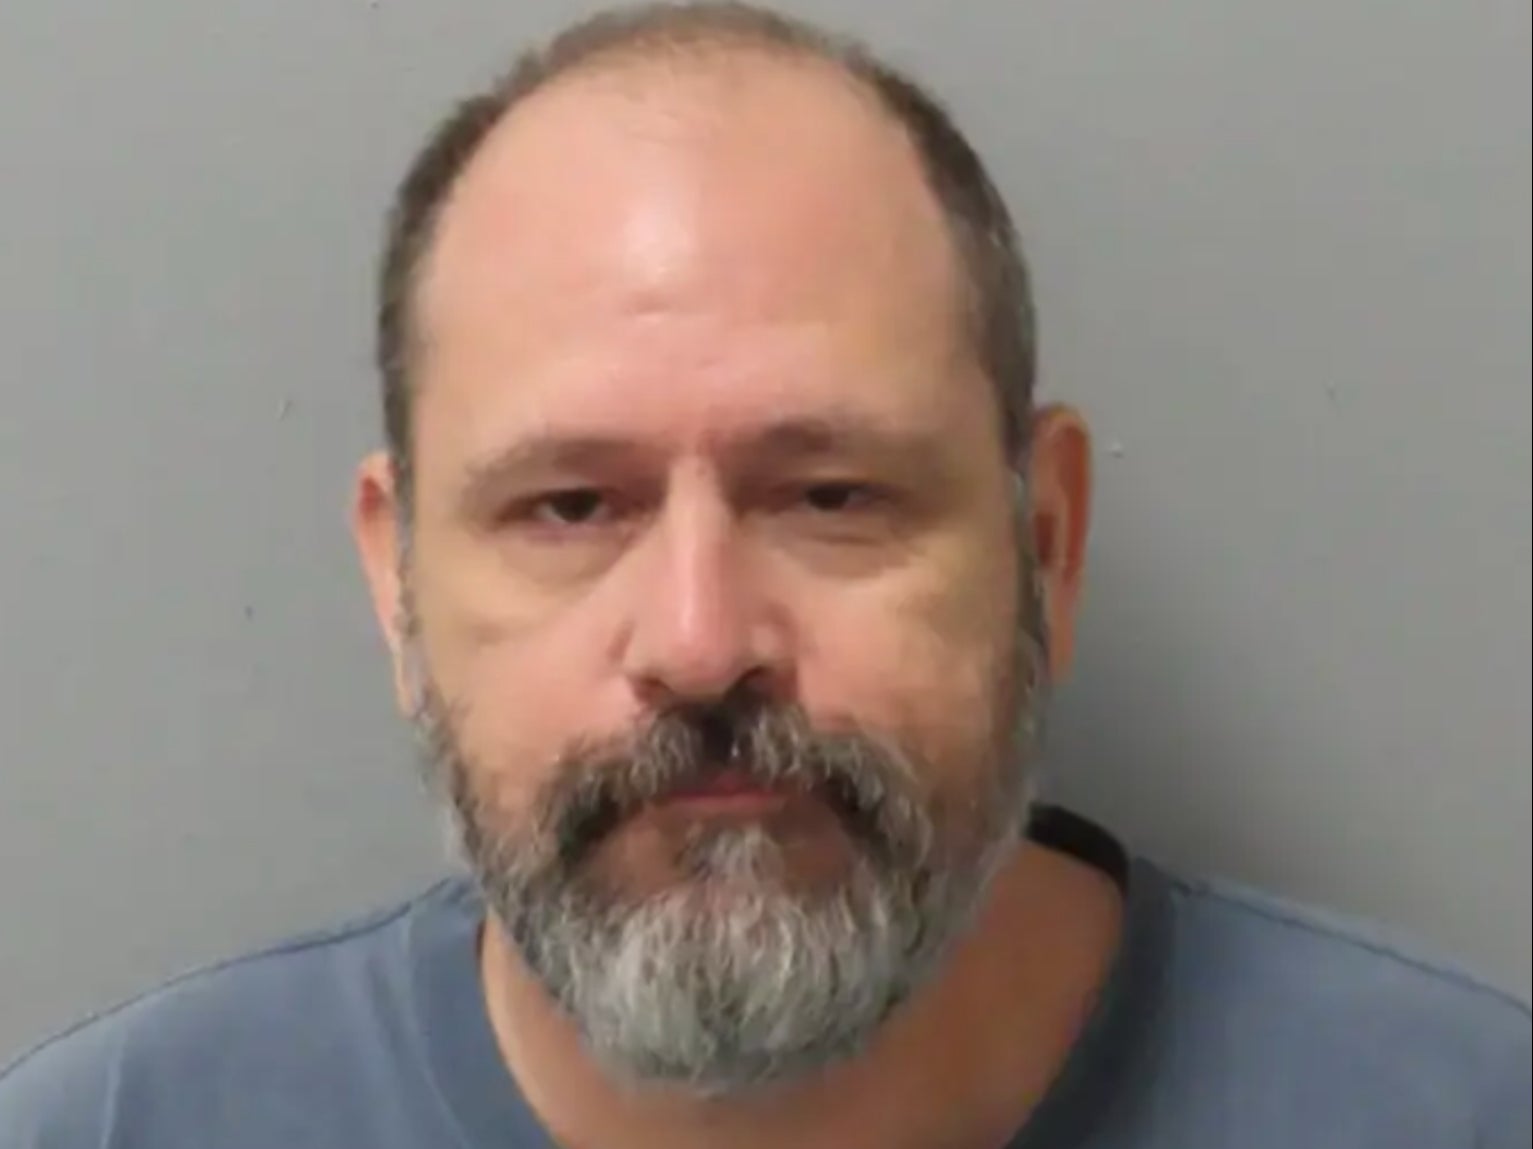 Fabian Marta, 51, was charged with accessory to child kidnapping, according to court records